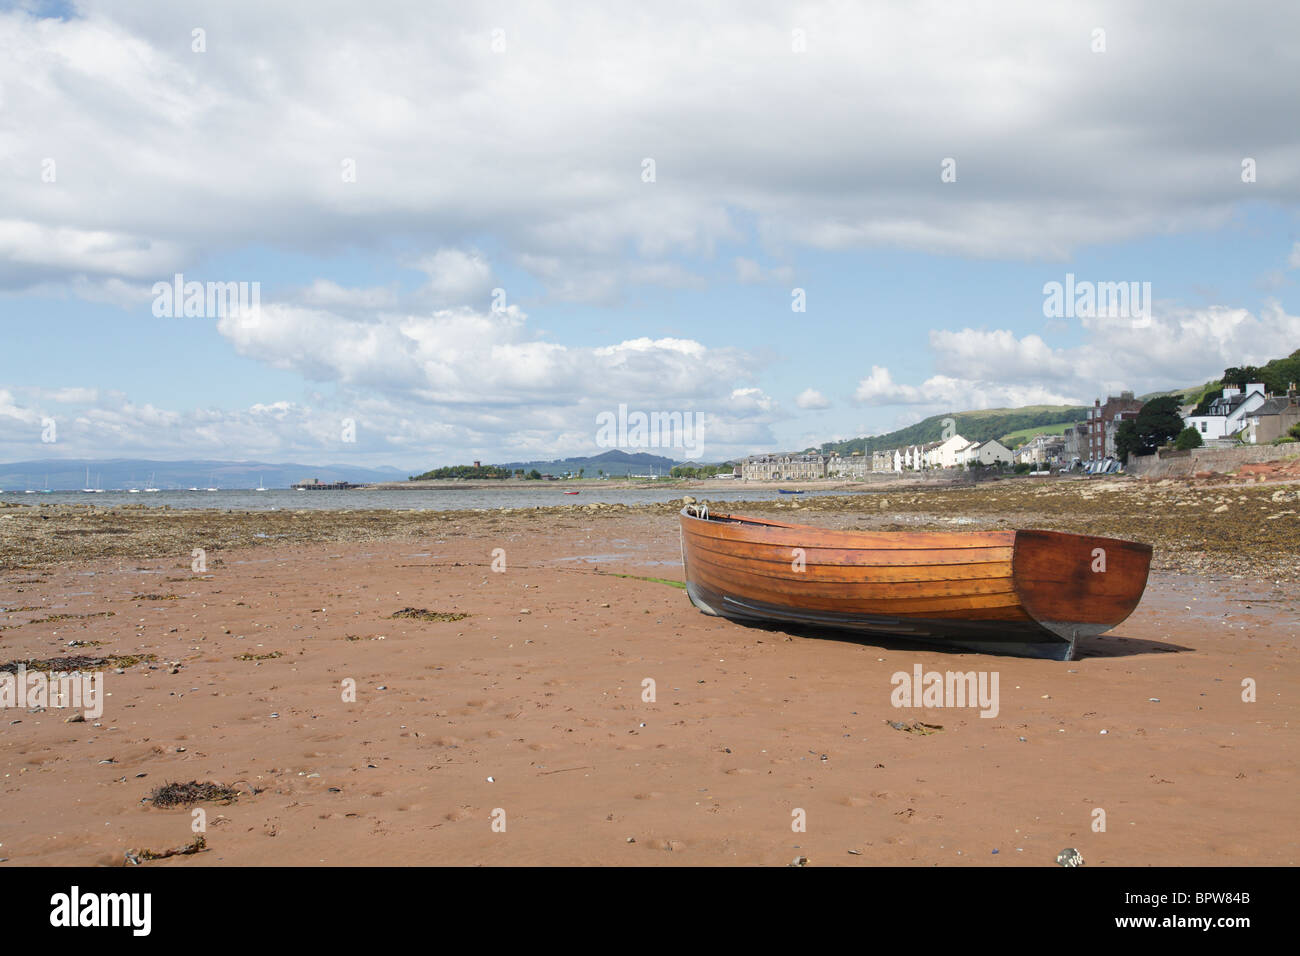 Rowing boat on the beach at Fairlie, a village on the Ayrshire Coastal Path beside the Firth of Clyde, North Ayrshire, West Coast of Scotland, UK Stock Photo